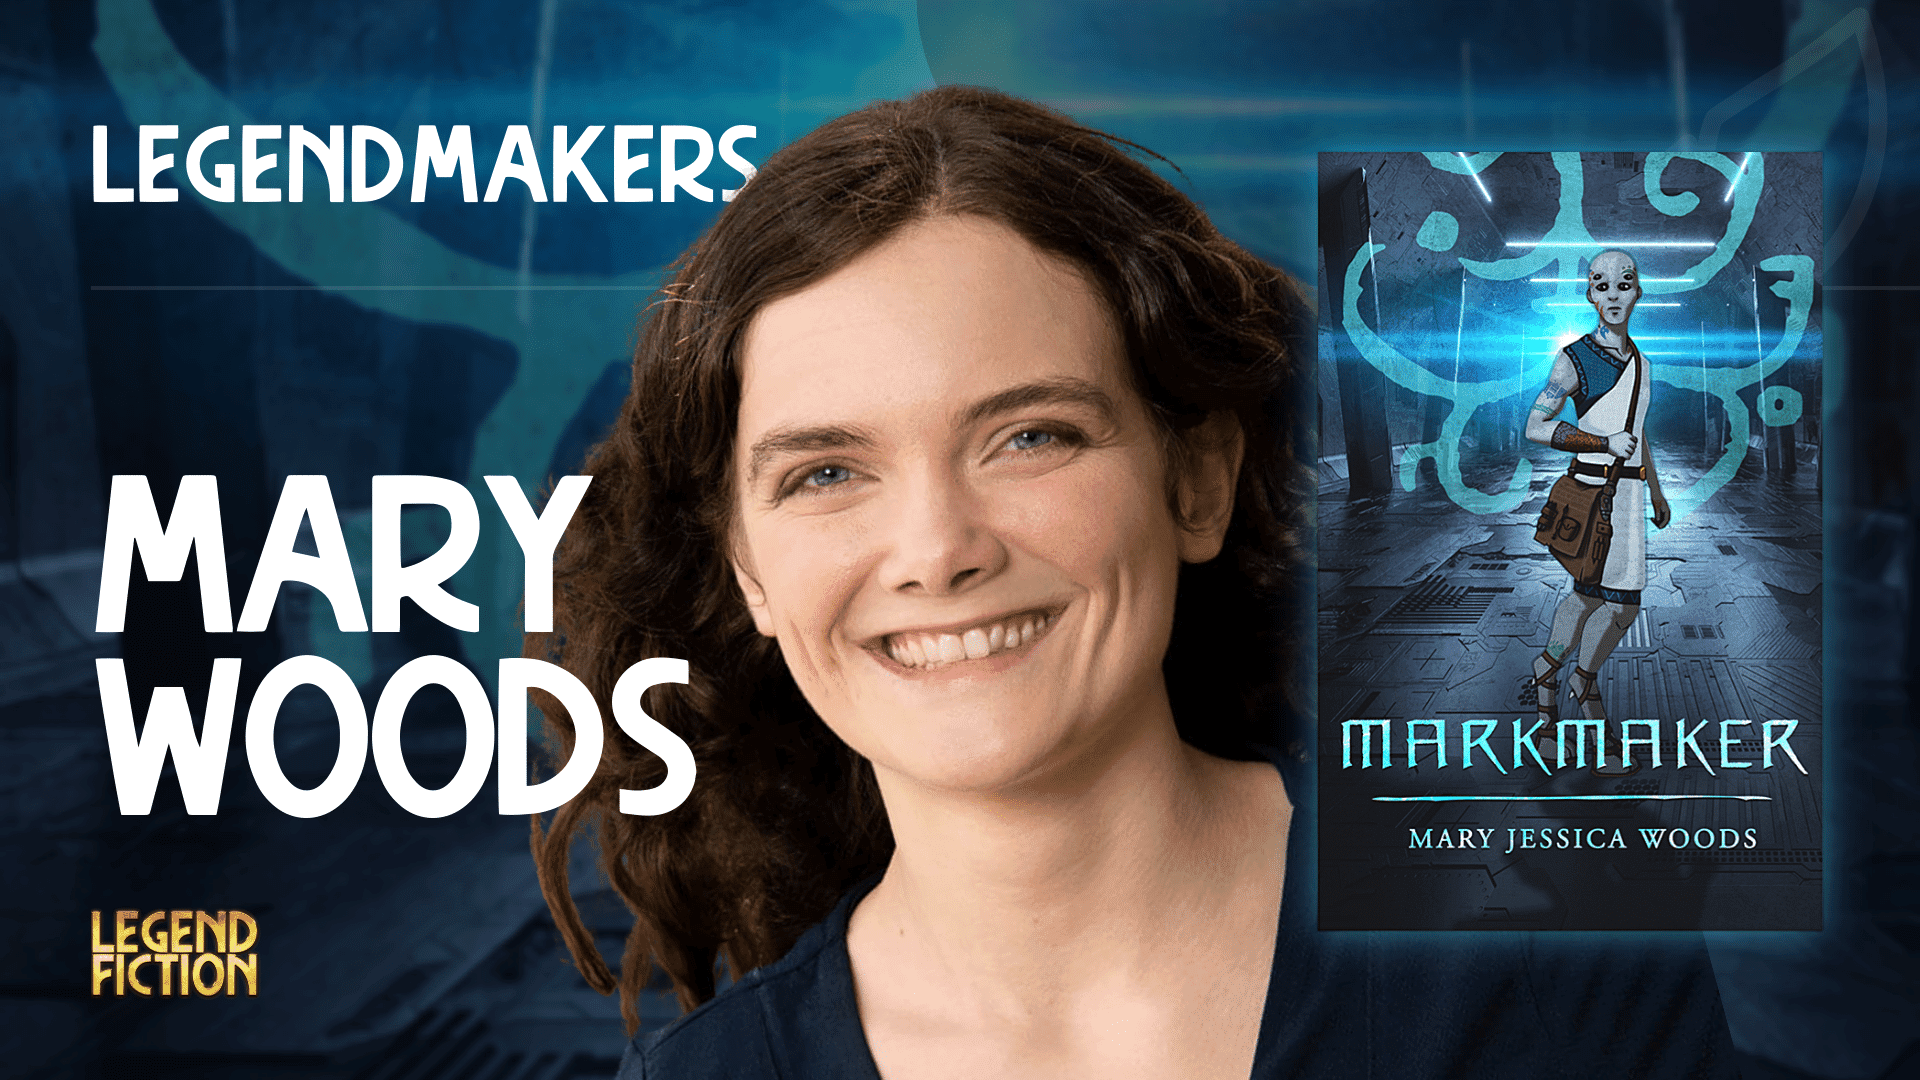 Alien worlds, morals, and Markmakers with Mary Woods | LegendFiction